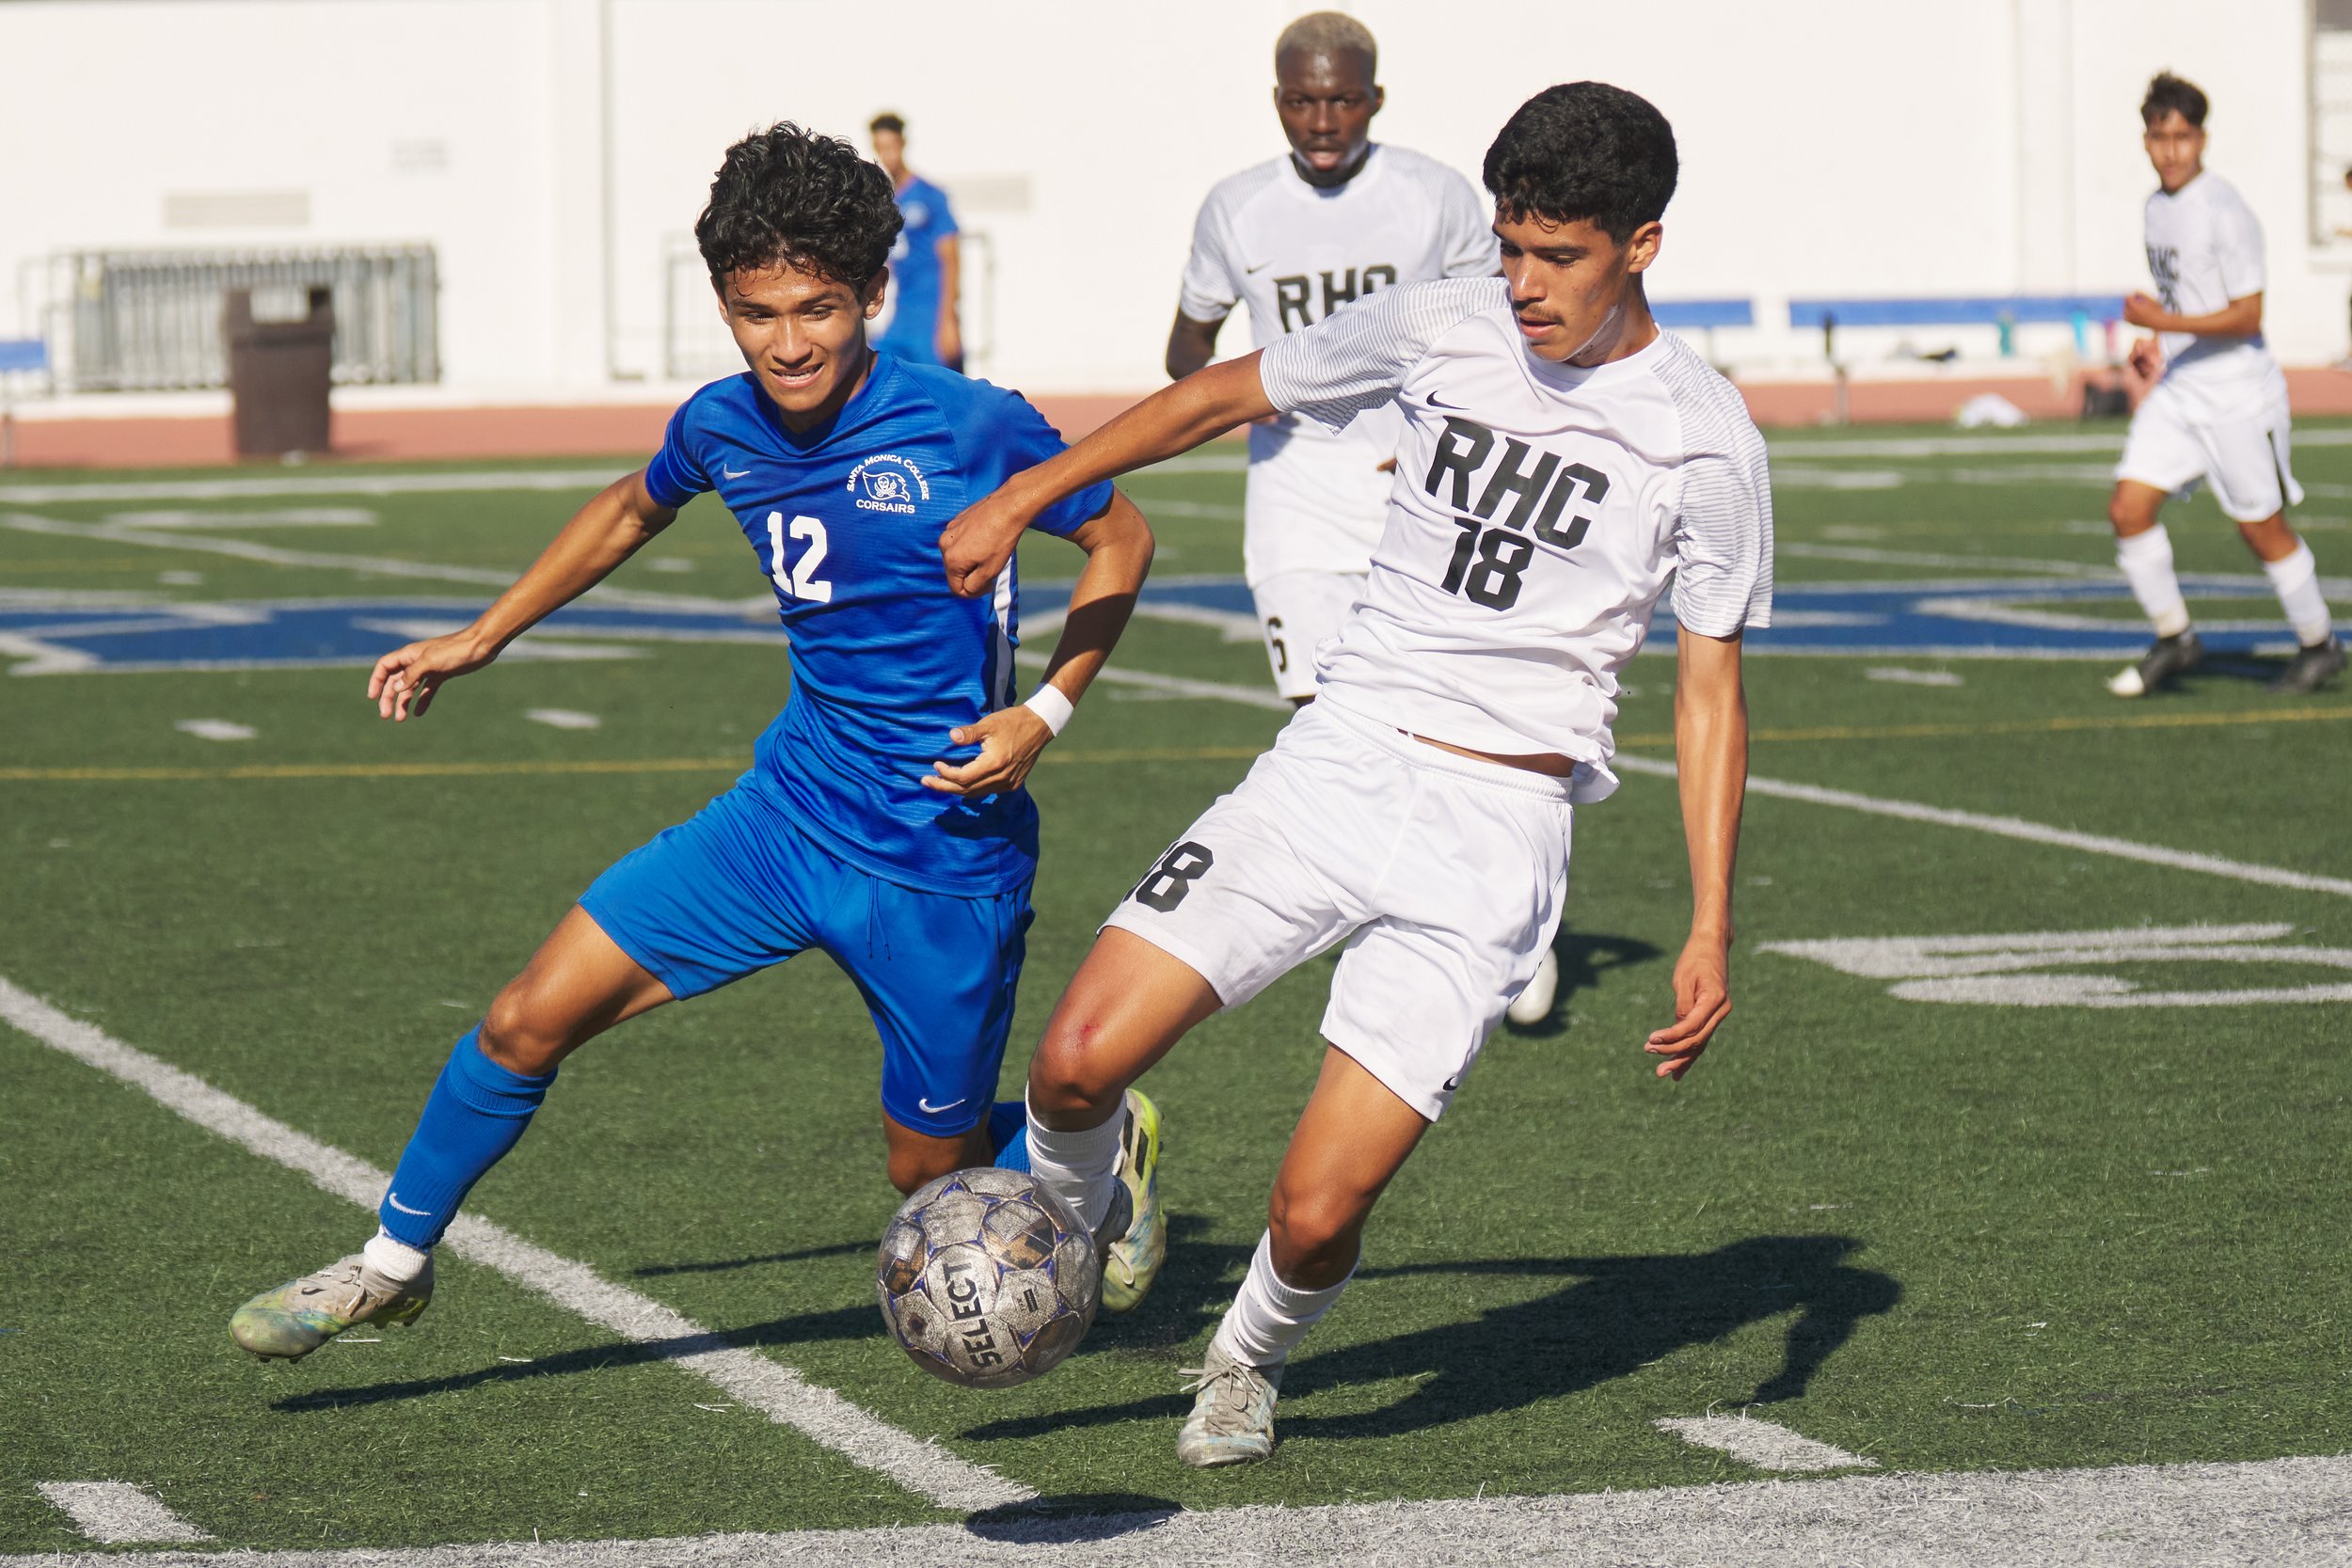  Santa Monica College Corsairs' Jason Moreno and Rio Hondo College Roadrunners' Jesus Garcia during the men's soccer match on Friday, Sept. 24, 2022, at Corsair Field in Santa Monica, Calif. The Corsairs won 2-1. (Nicholas McCall | The Corsair) 